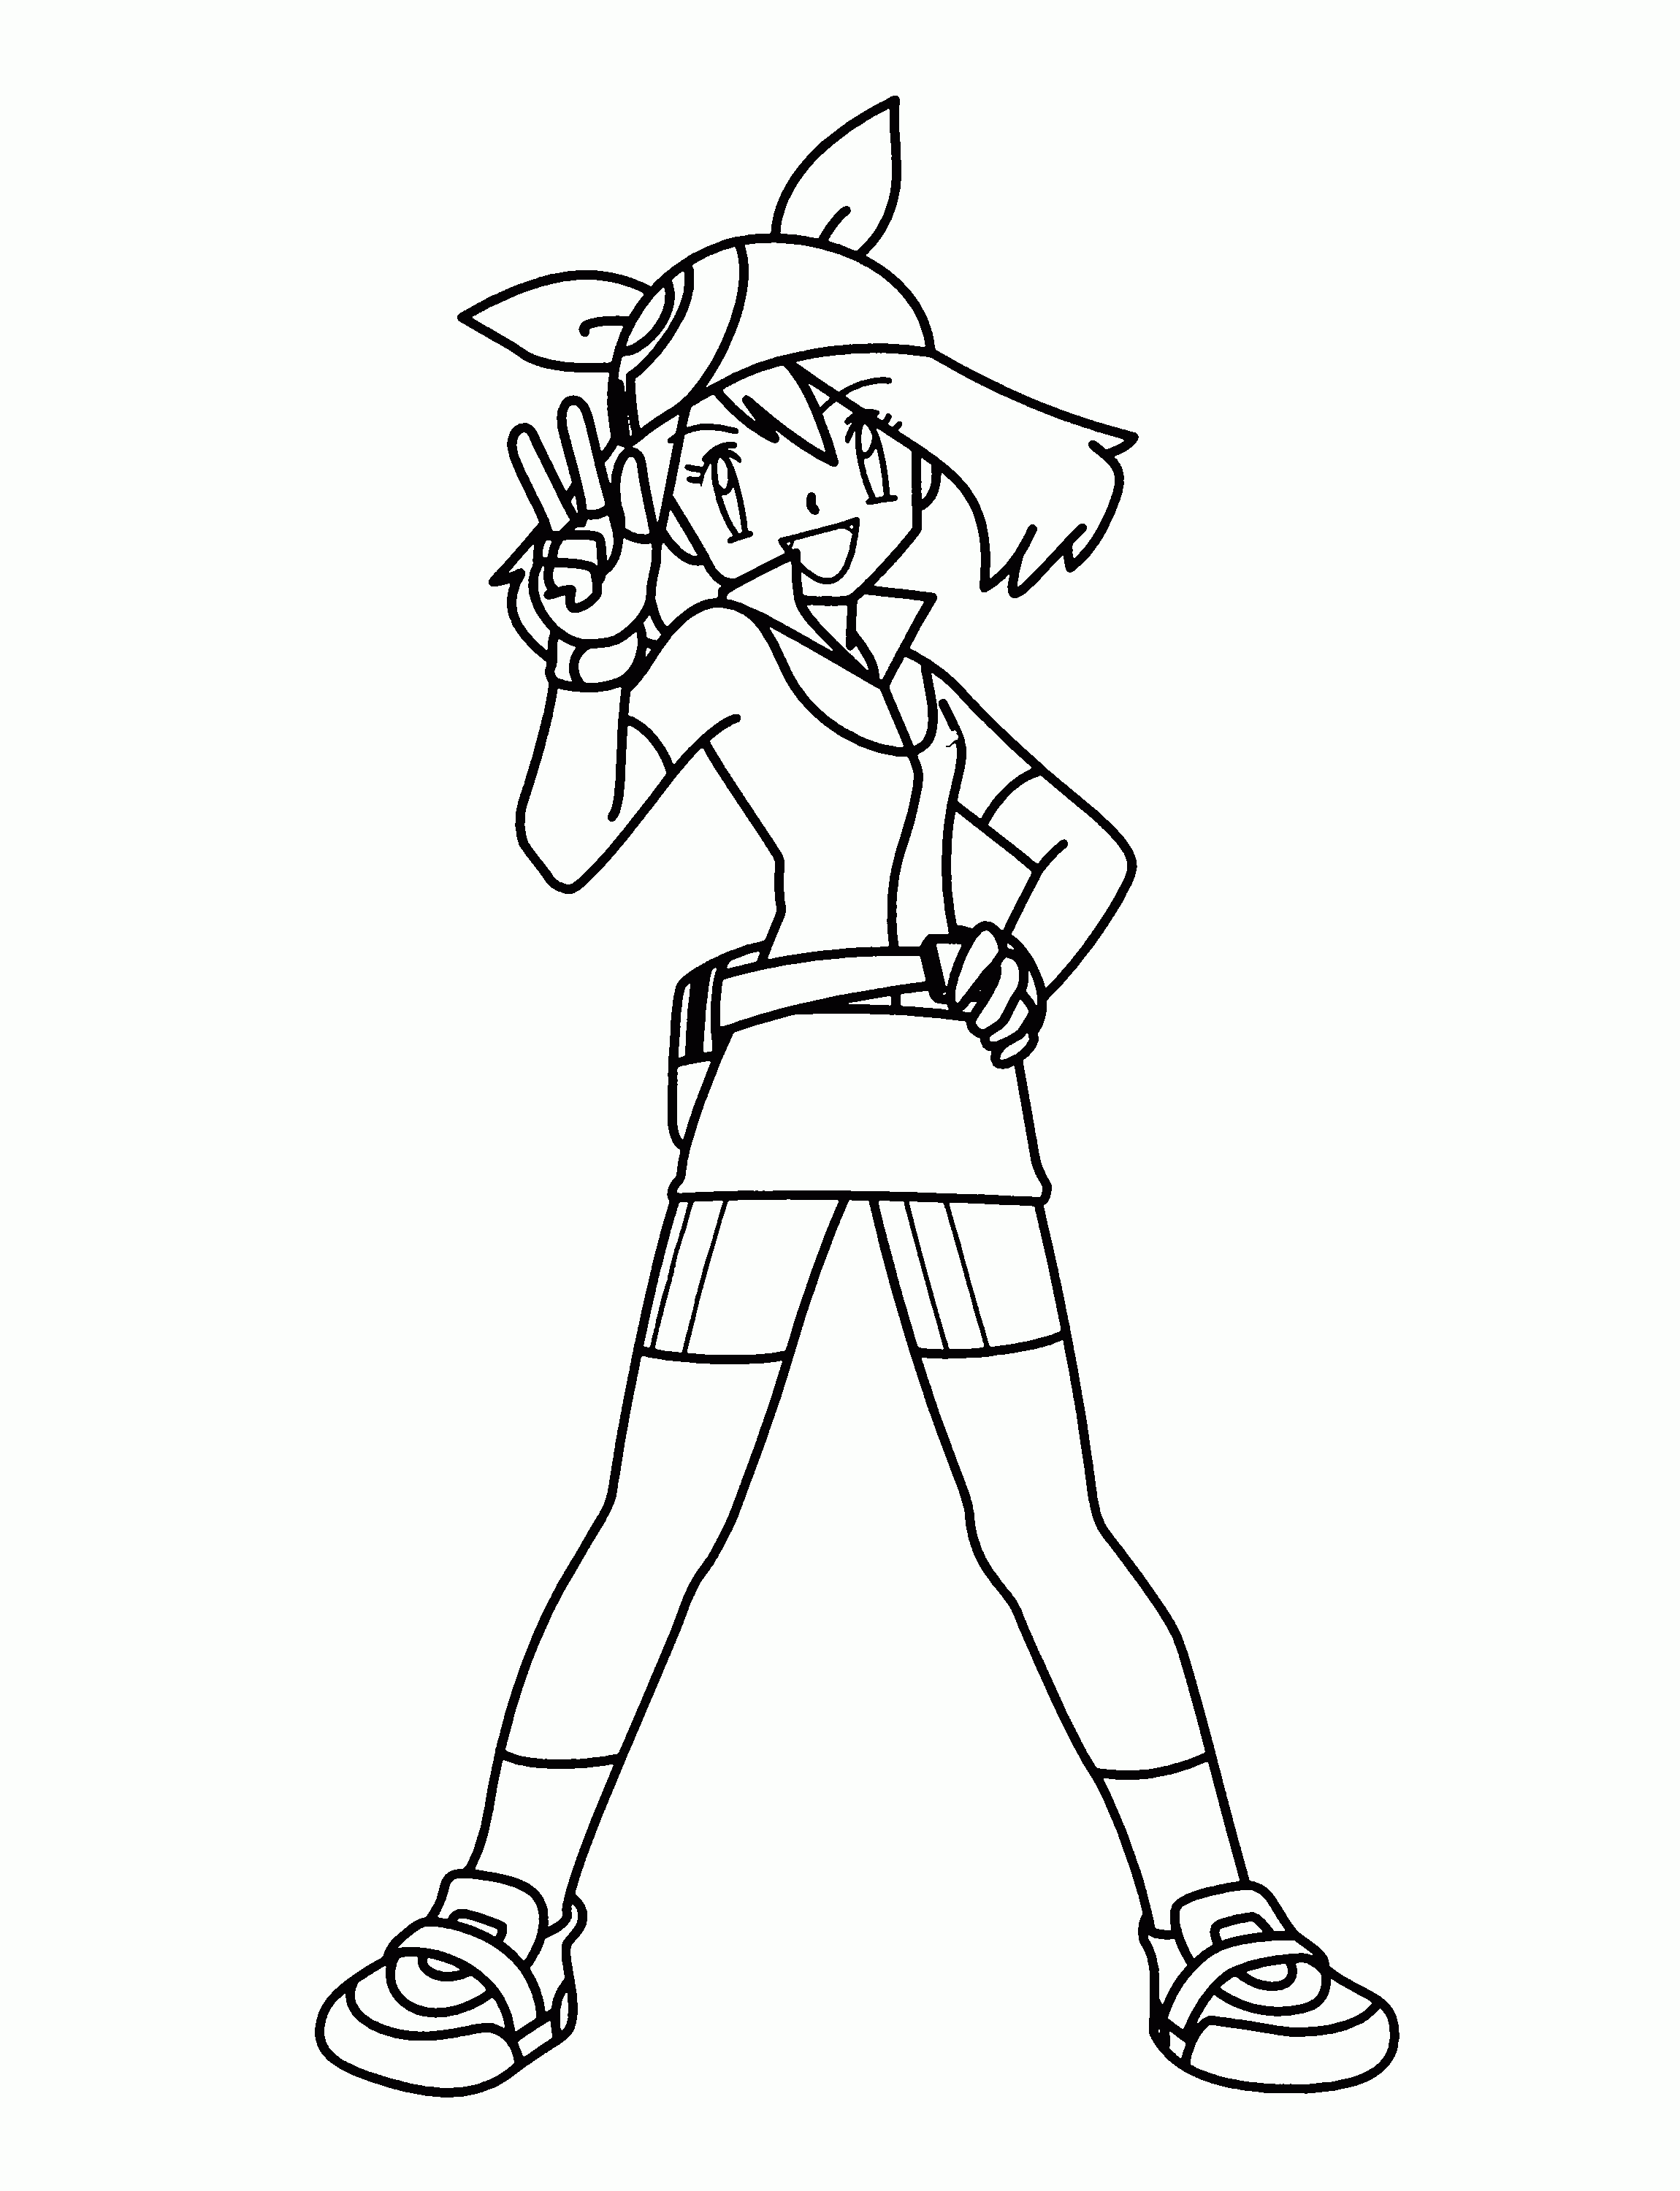 Pokemon Trainer May Coloring Pages, emulator download for fun new ...